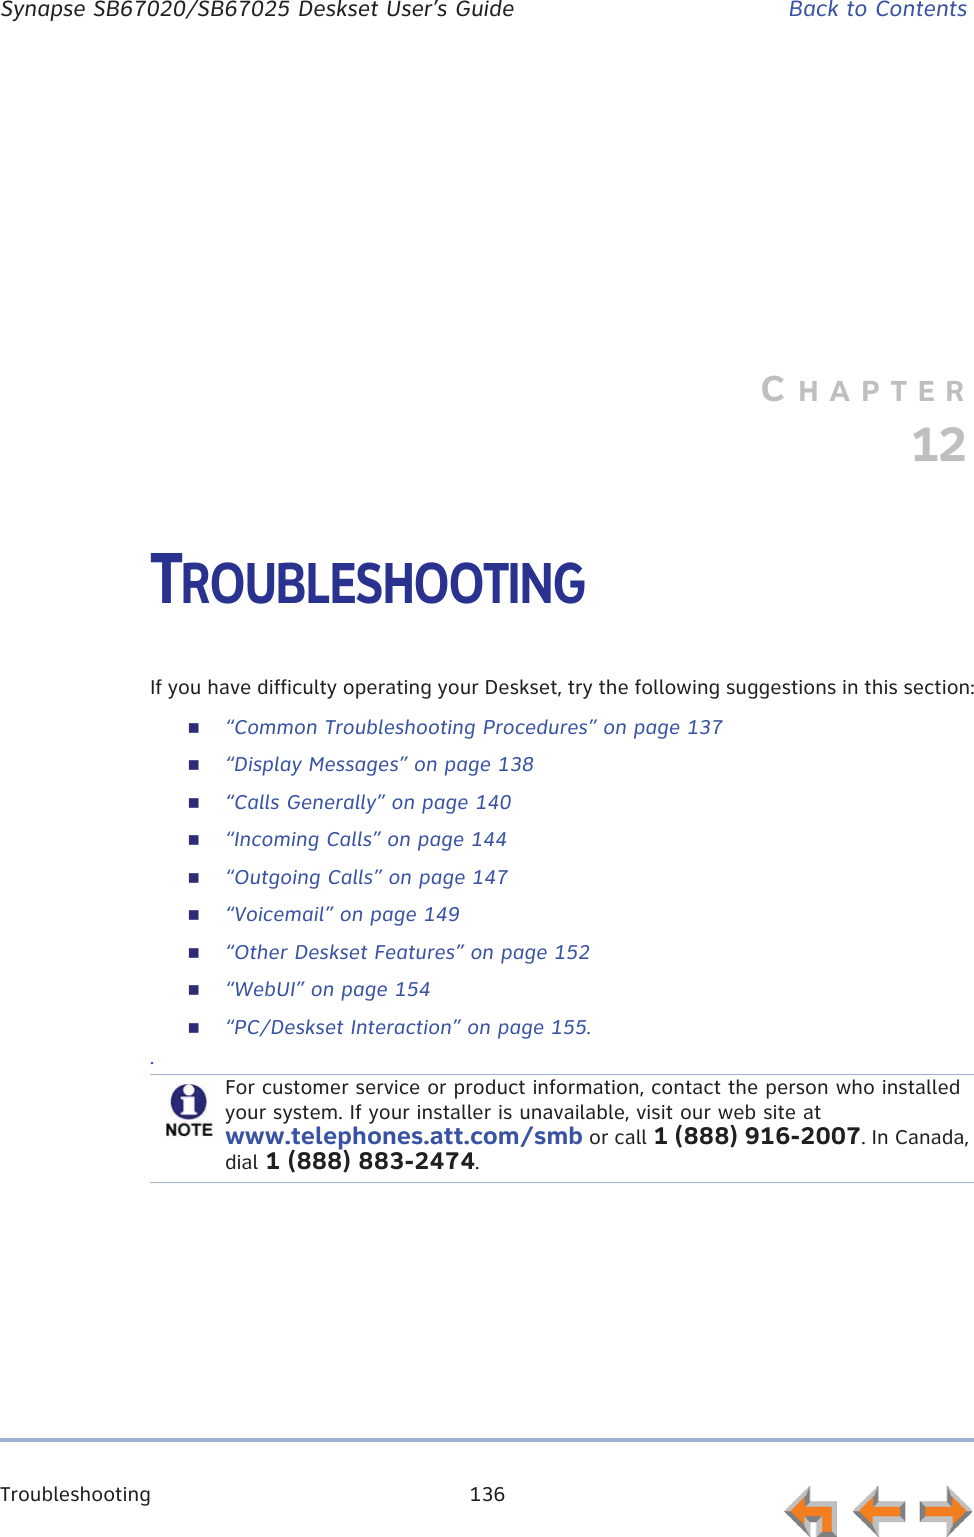 Troubleshooting 136      Synapse SB67020/SB67025 Deskset User’s Guide Back to ContentsCHAPTER12TROUBLESHOOTINGIf you have difficulty operating your Deskset, try the following suggestions in this section:“Common Troubleshooting Procedures” on page 137“Display Messages” on page 138“Calls Generally” on page 140“Incoming Calls” on page 144“Outgoing Calls” on page 147“Voicemail” on page 149“Other Deskset Features” on page 152“WebUI” on page 154“PC/Deskset Interaction” on page 155..For customer service or product information, contact the person who installed your system. If your installer is unavailable, visit our web site at www.telephones.att.com/smb or call 1 (888) 916-2007. In Canada, dial 1 (888) 883-2474.